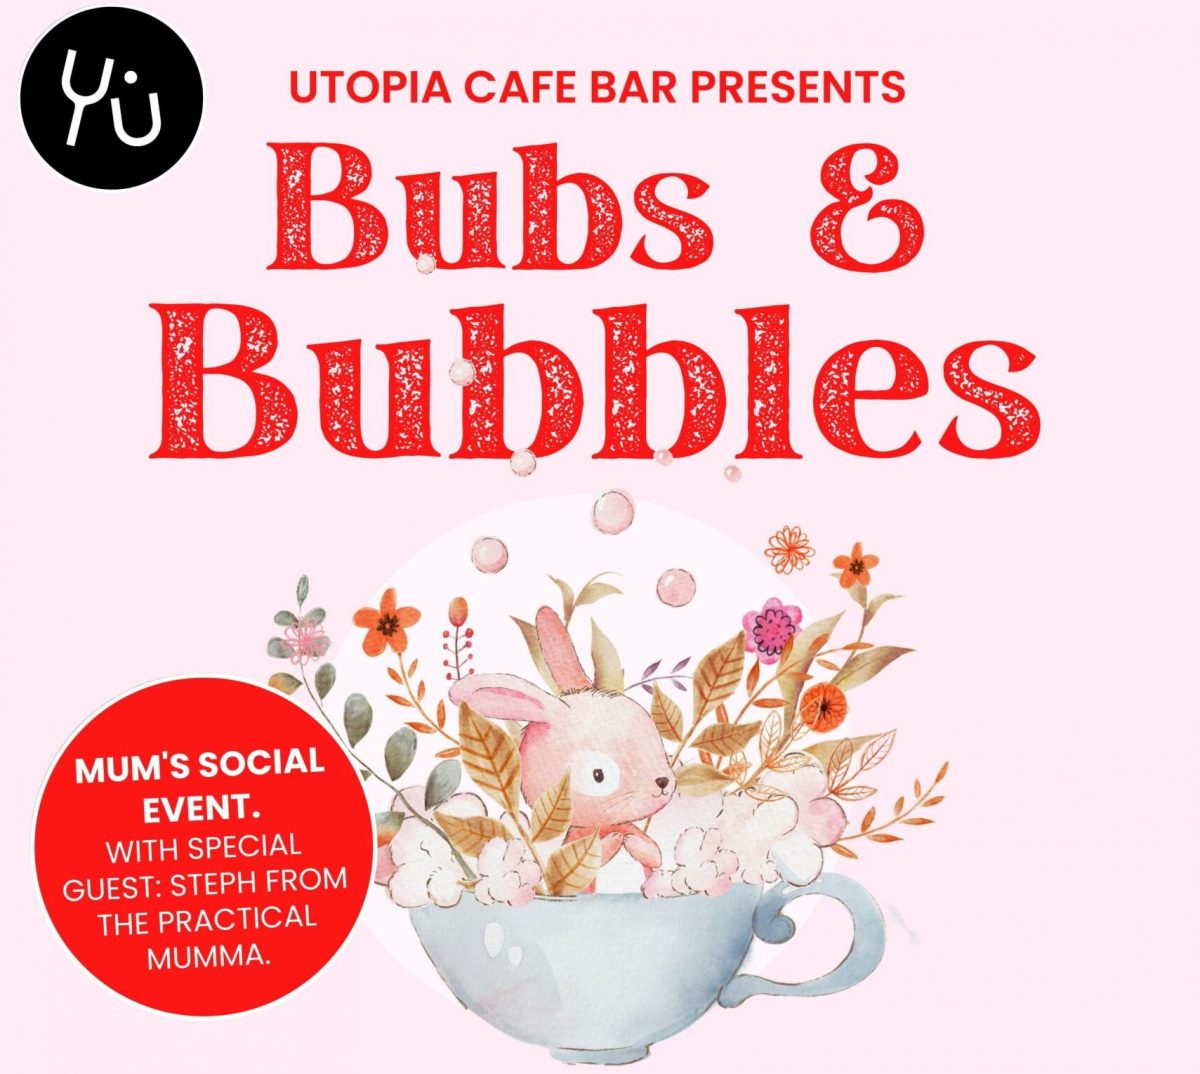 Flyer for Bubs and Bubbles event at Utopia Cafe Bar